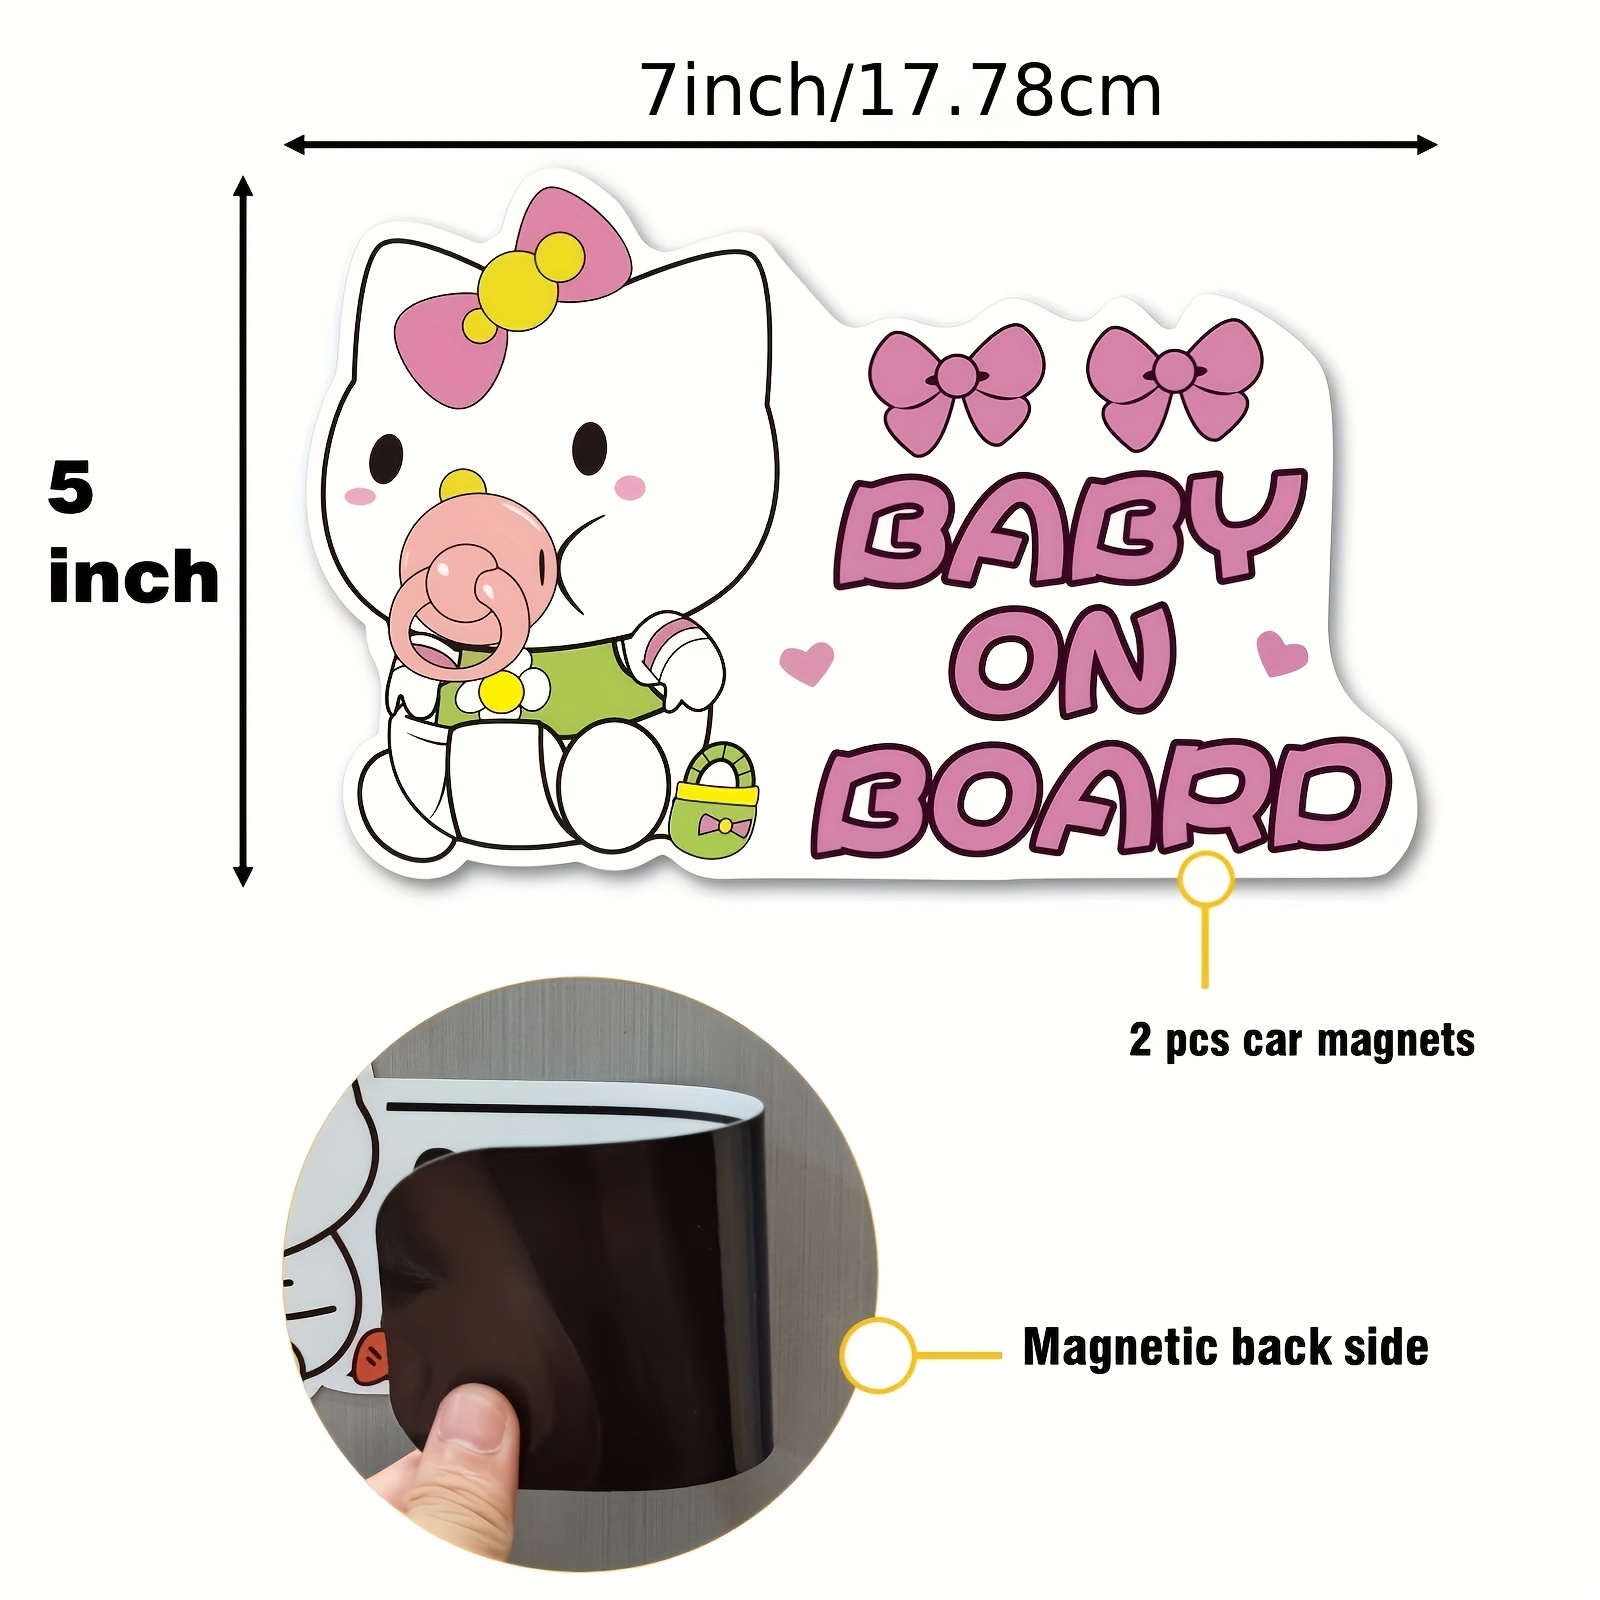 Magnet stickers incompatible with rear gate? We recently welcomed our first  child into the family and I got some magnetic stickers that say “Baby on  Board” for the cars. I can't get